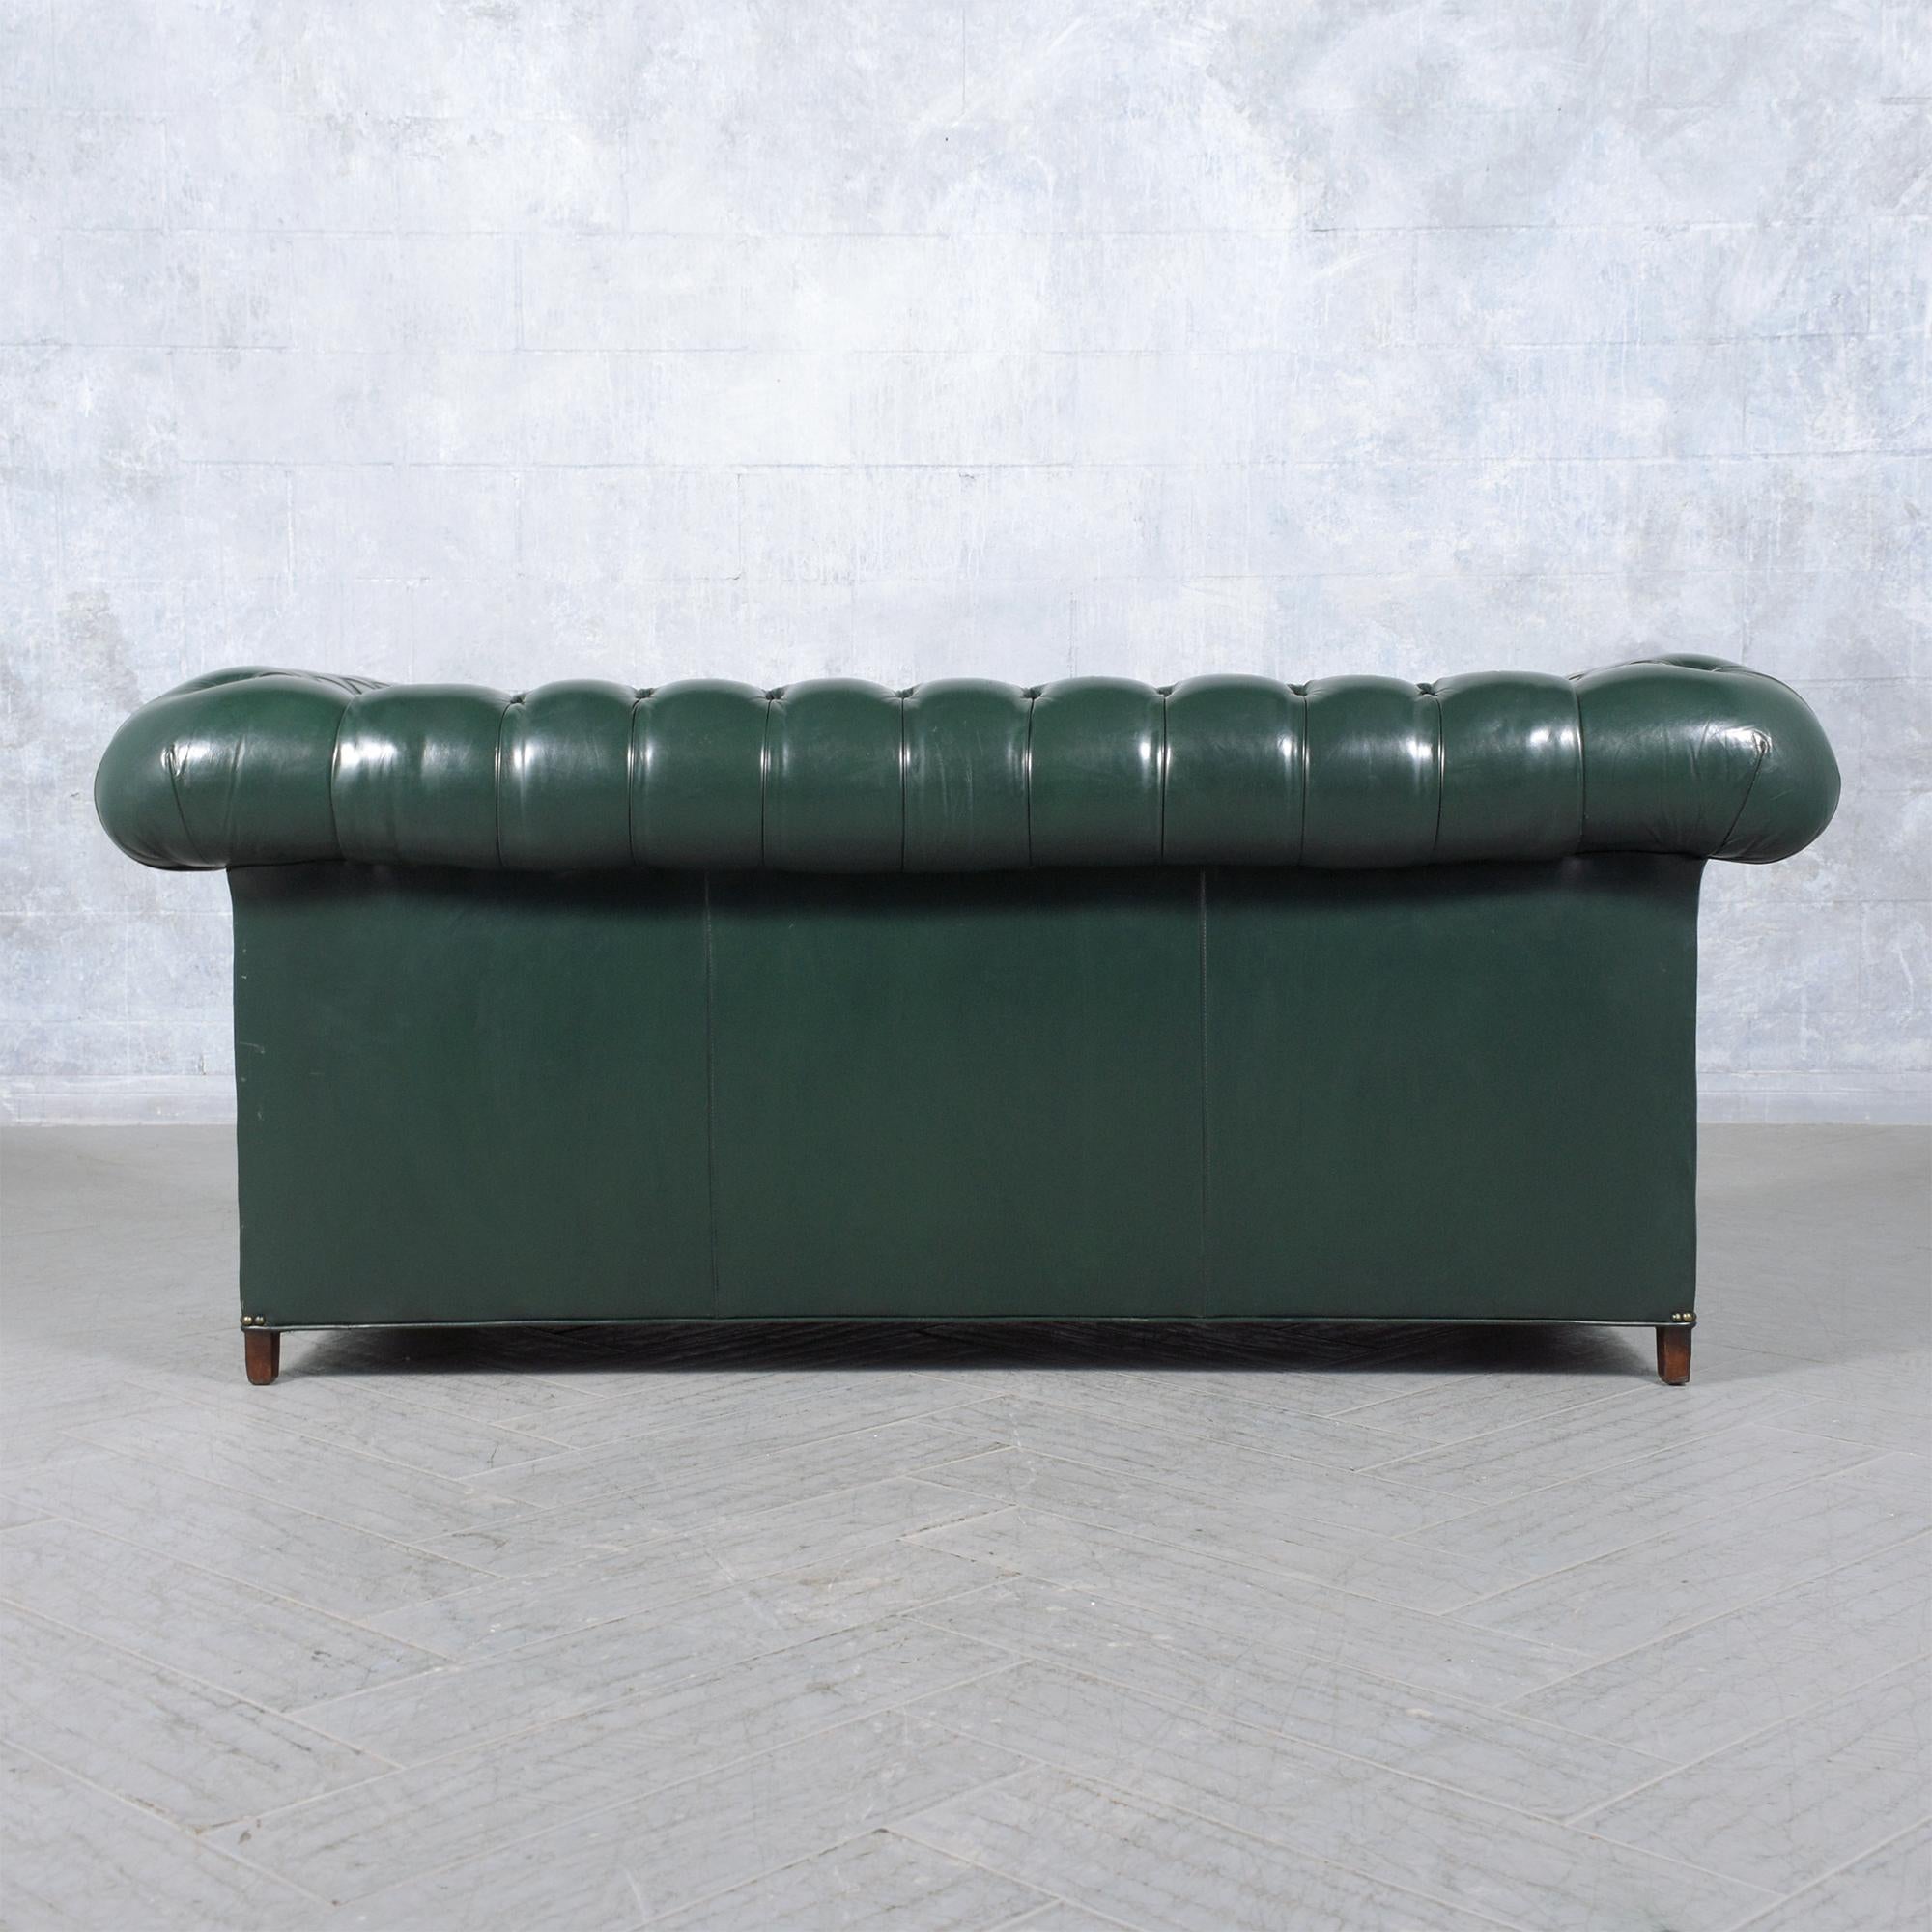 1970s Vintage Chesterfield Sofa: Emerald Green Leather with Elegant Carved Legs 8